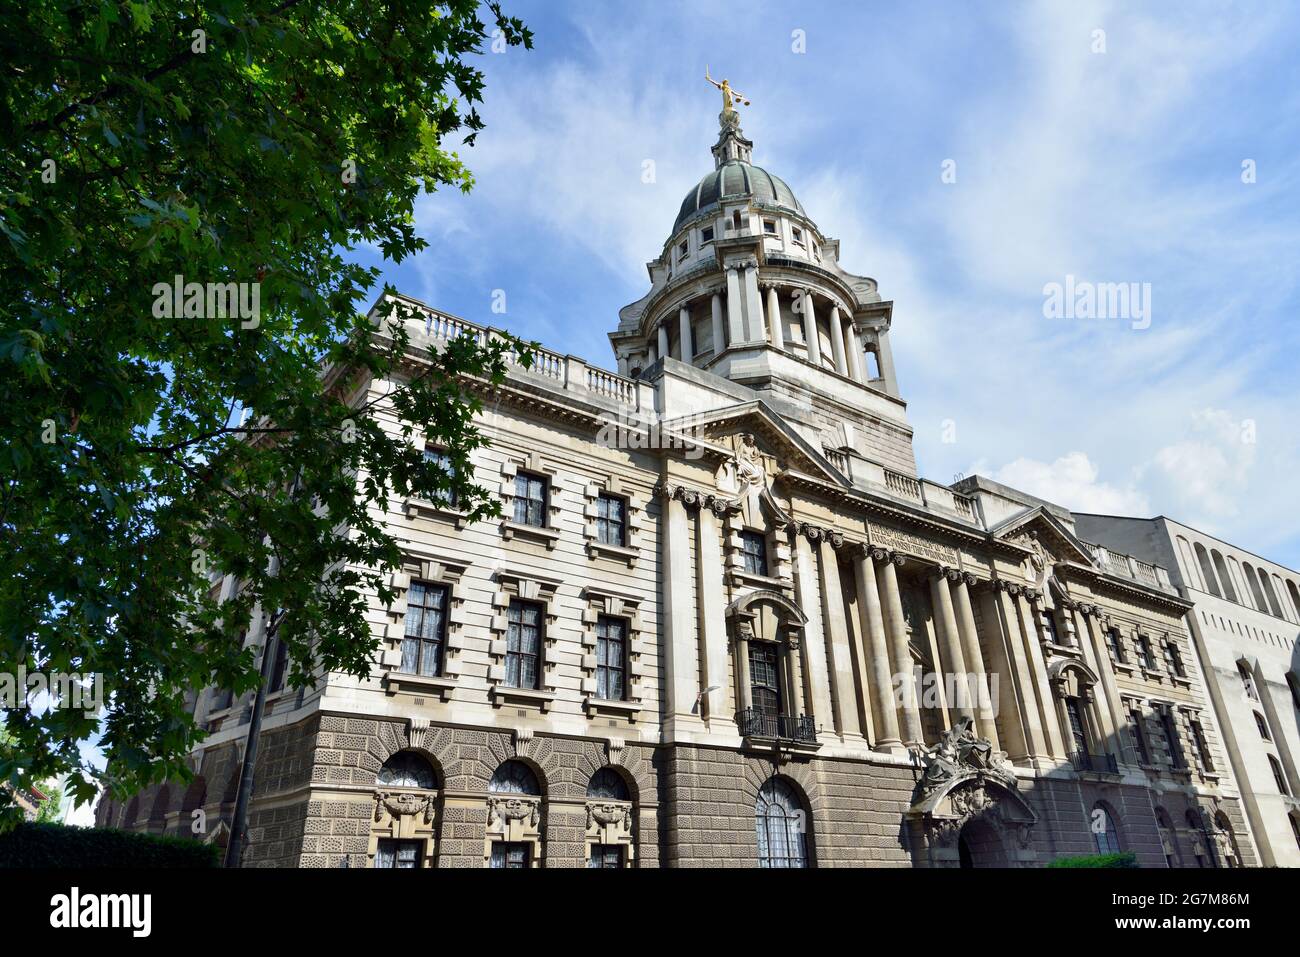 Central Criminal Court of England and Wales, The Old Bailey, City of London, United Kingdom Stock Photo